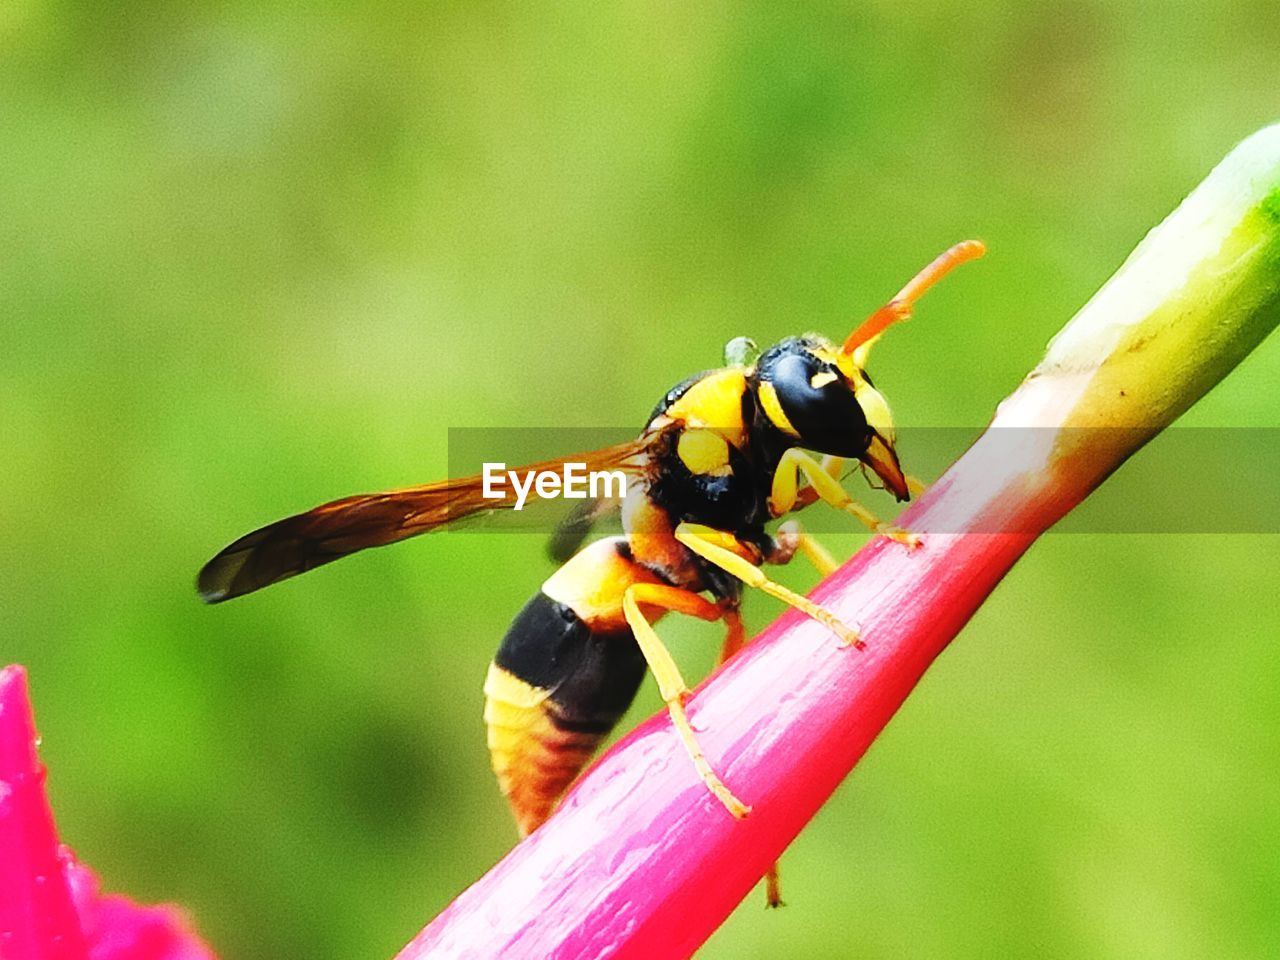 animal themes, animal, animal wildlife, insect, wildlife, one animal, close-up, beauty in nature, nature, macro photography, plant, focus on foreground, flower, animal wing, wasp, no people, fragility, animal body part, outdoors, macro, plant stem, flowering plant, perching, day, hornet, magnification, yellow, full length, freshness